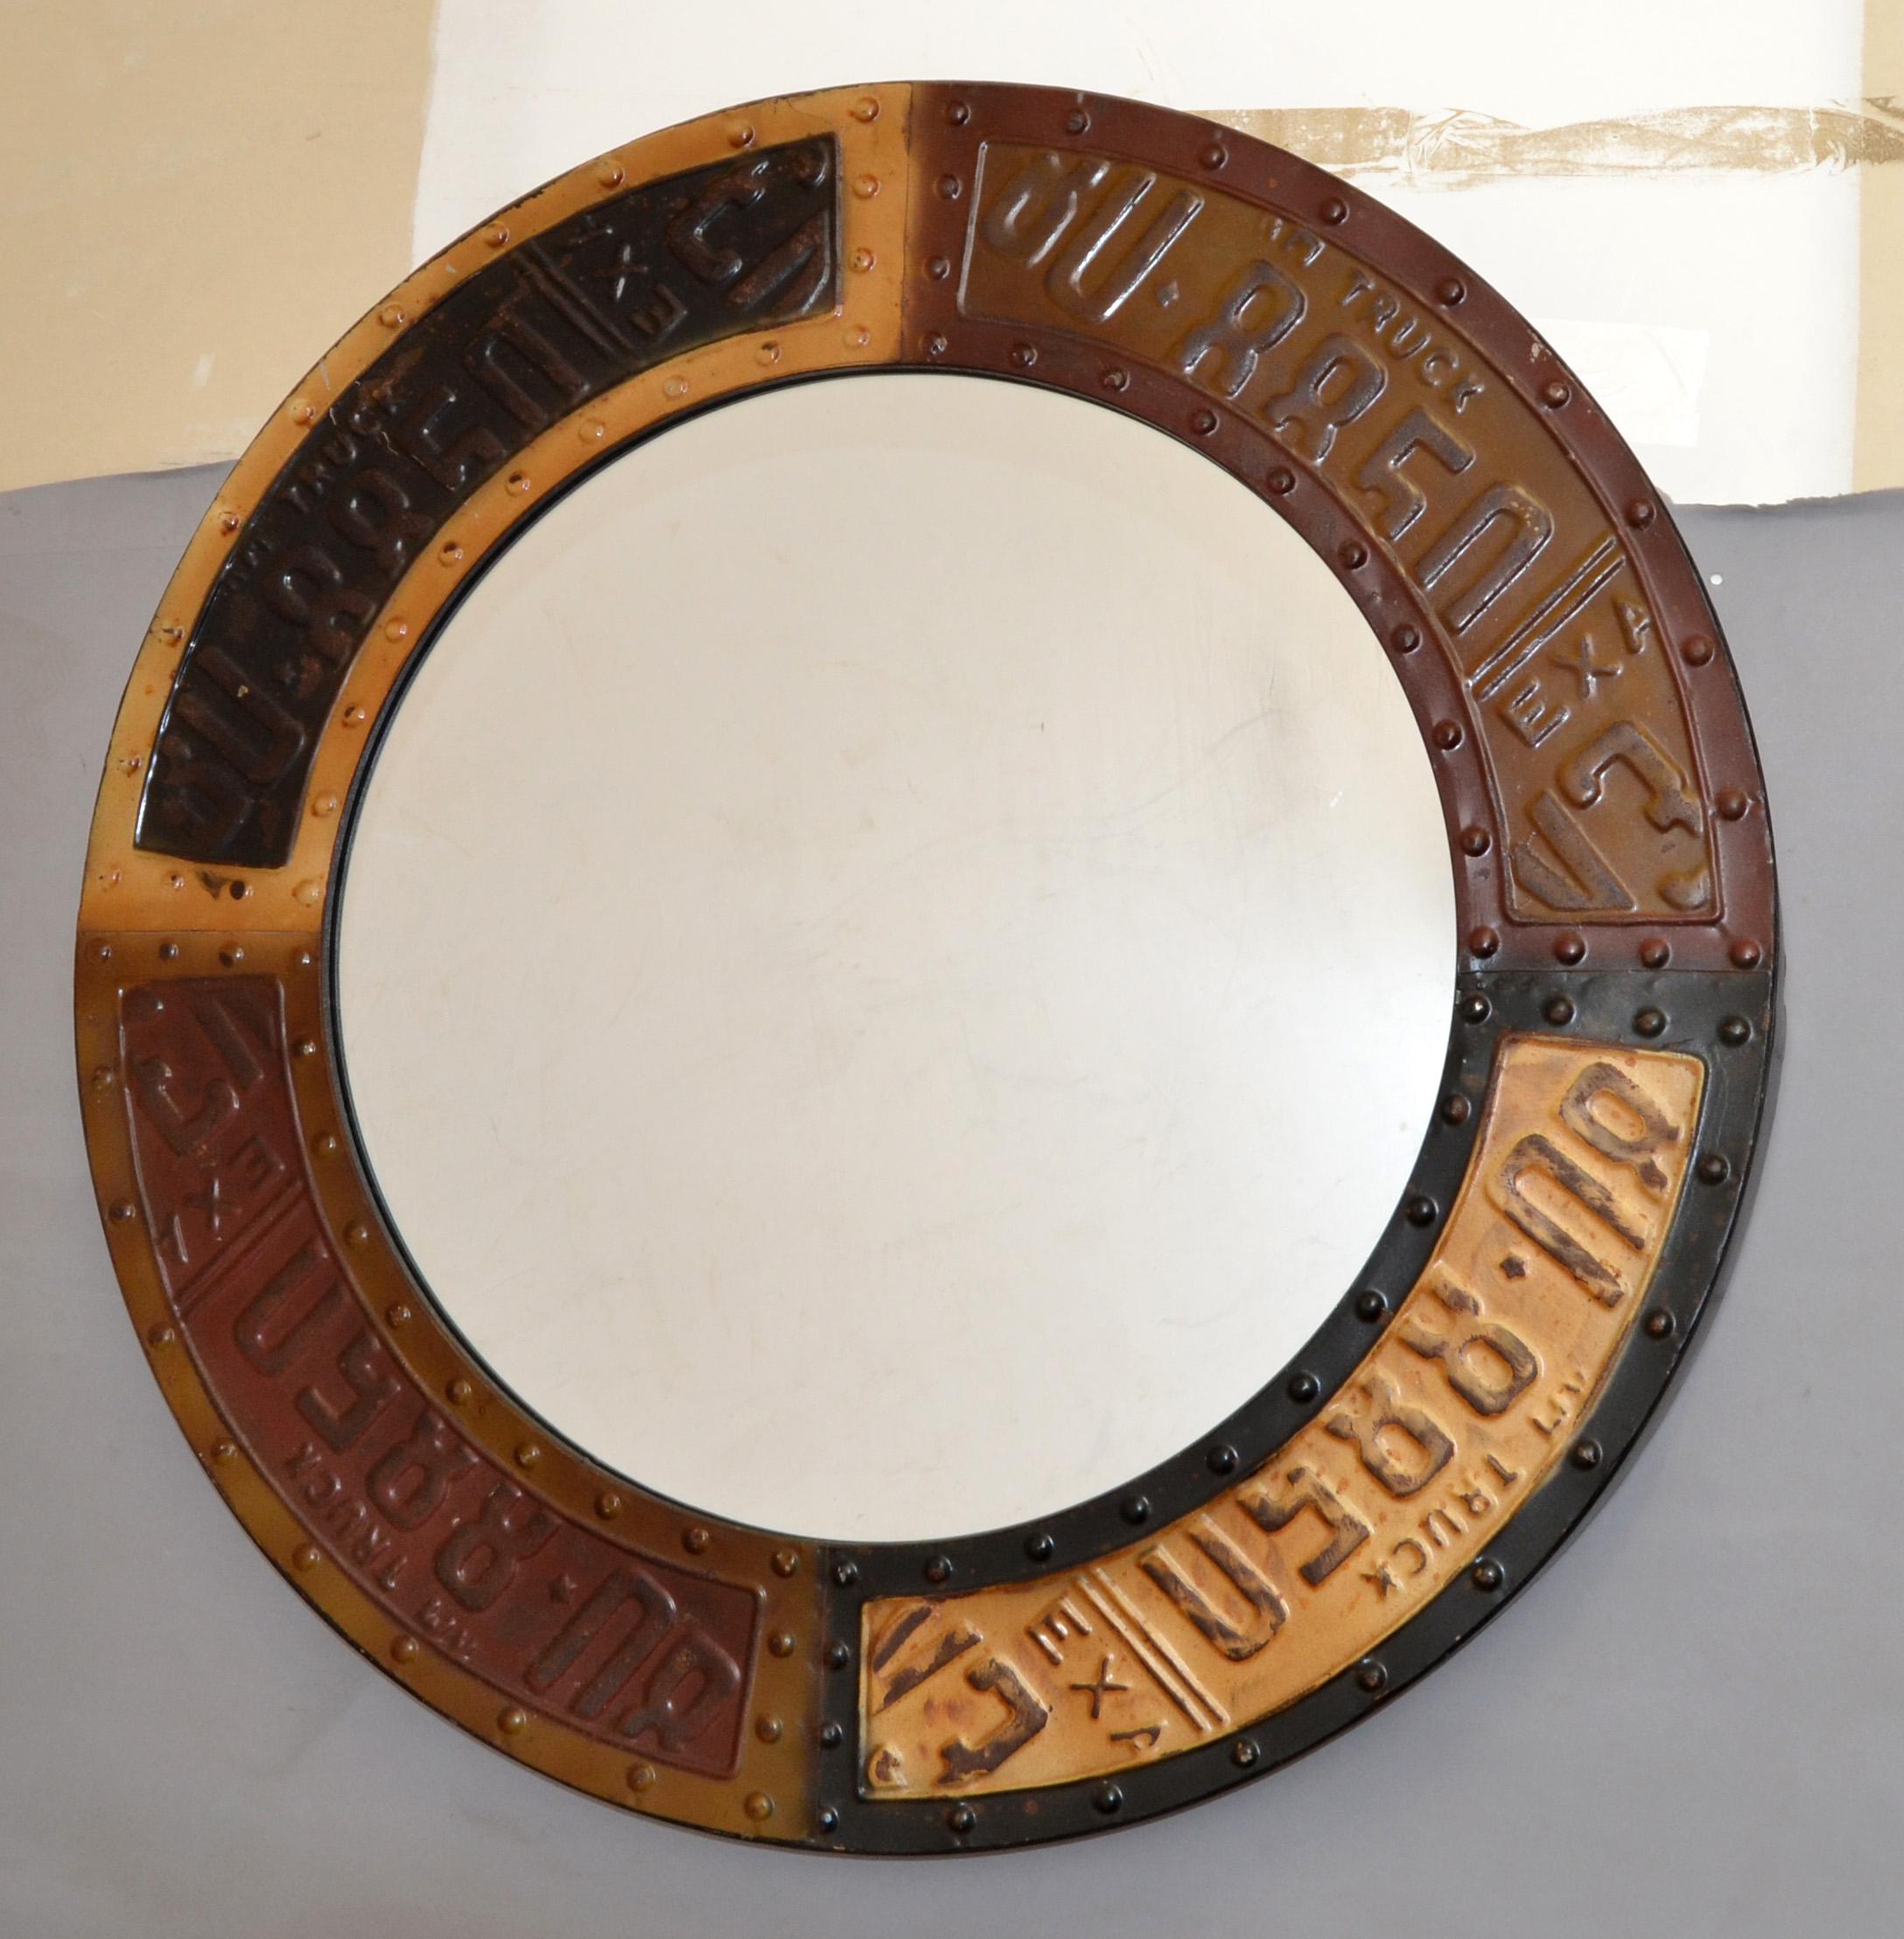 Mid-Century Modern Brutalist Style Round Metal Wall Mirror Texas Truck Theme in Hues of Brown on Black Finish.
Pop Art depicting parts of Texas License Plates squares.
Made in America circa 1980s.
A stunning Accent Mirror for a Boys Room, Man